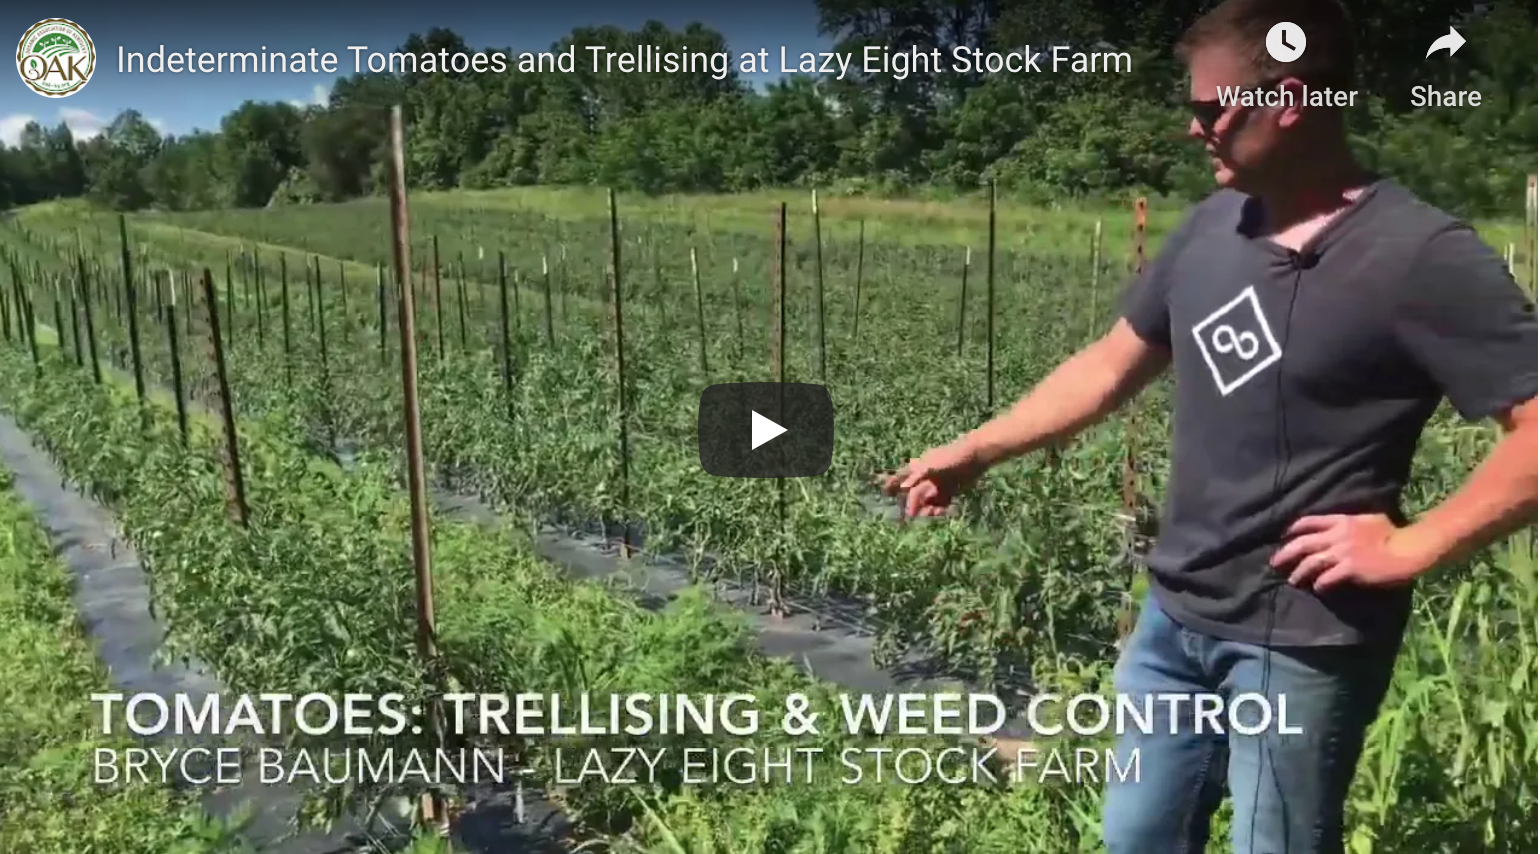 Previous Happening: Trellising tomatoes at Lazy Eight Stock Farm